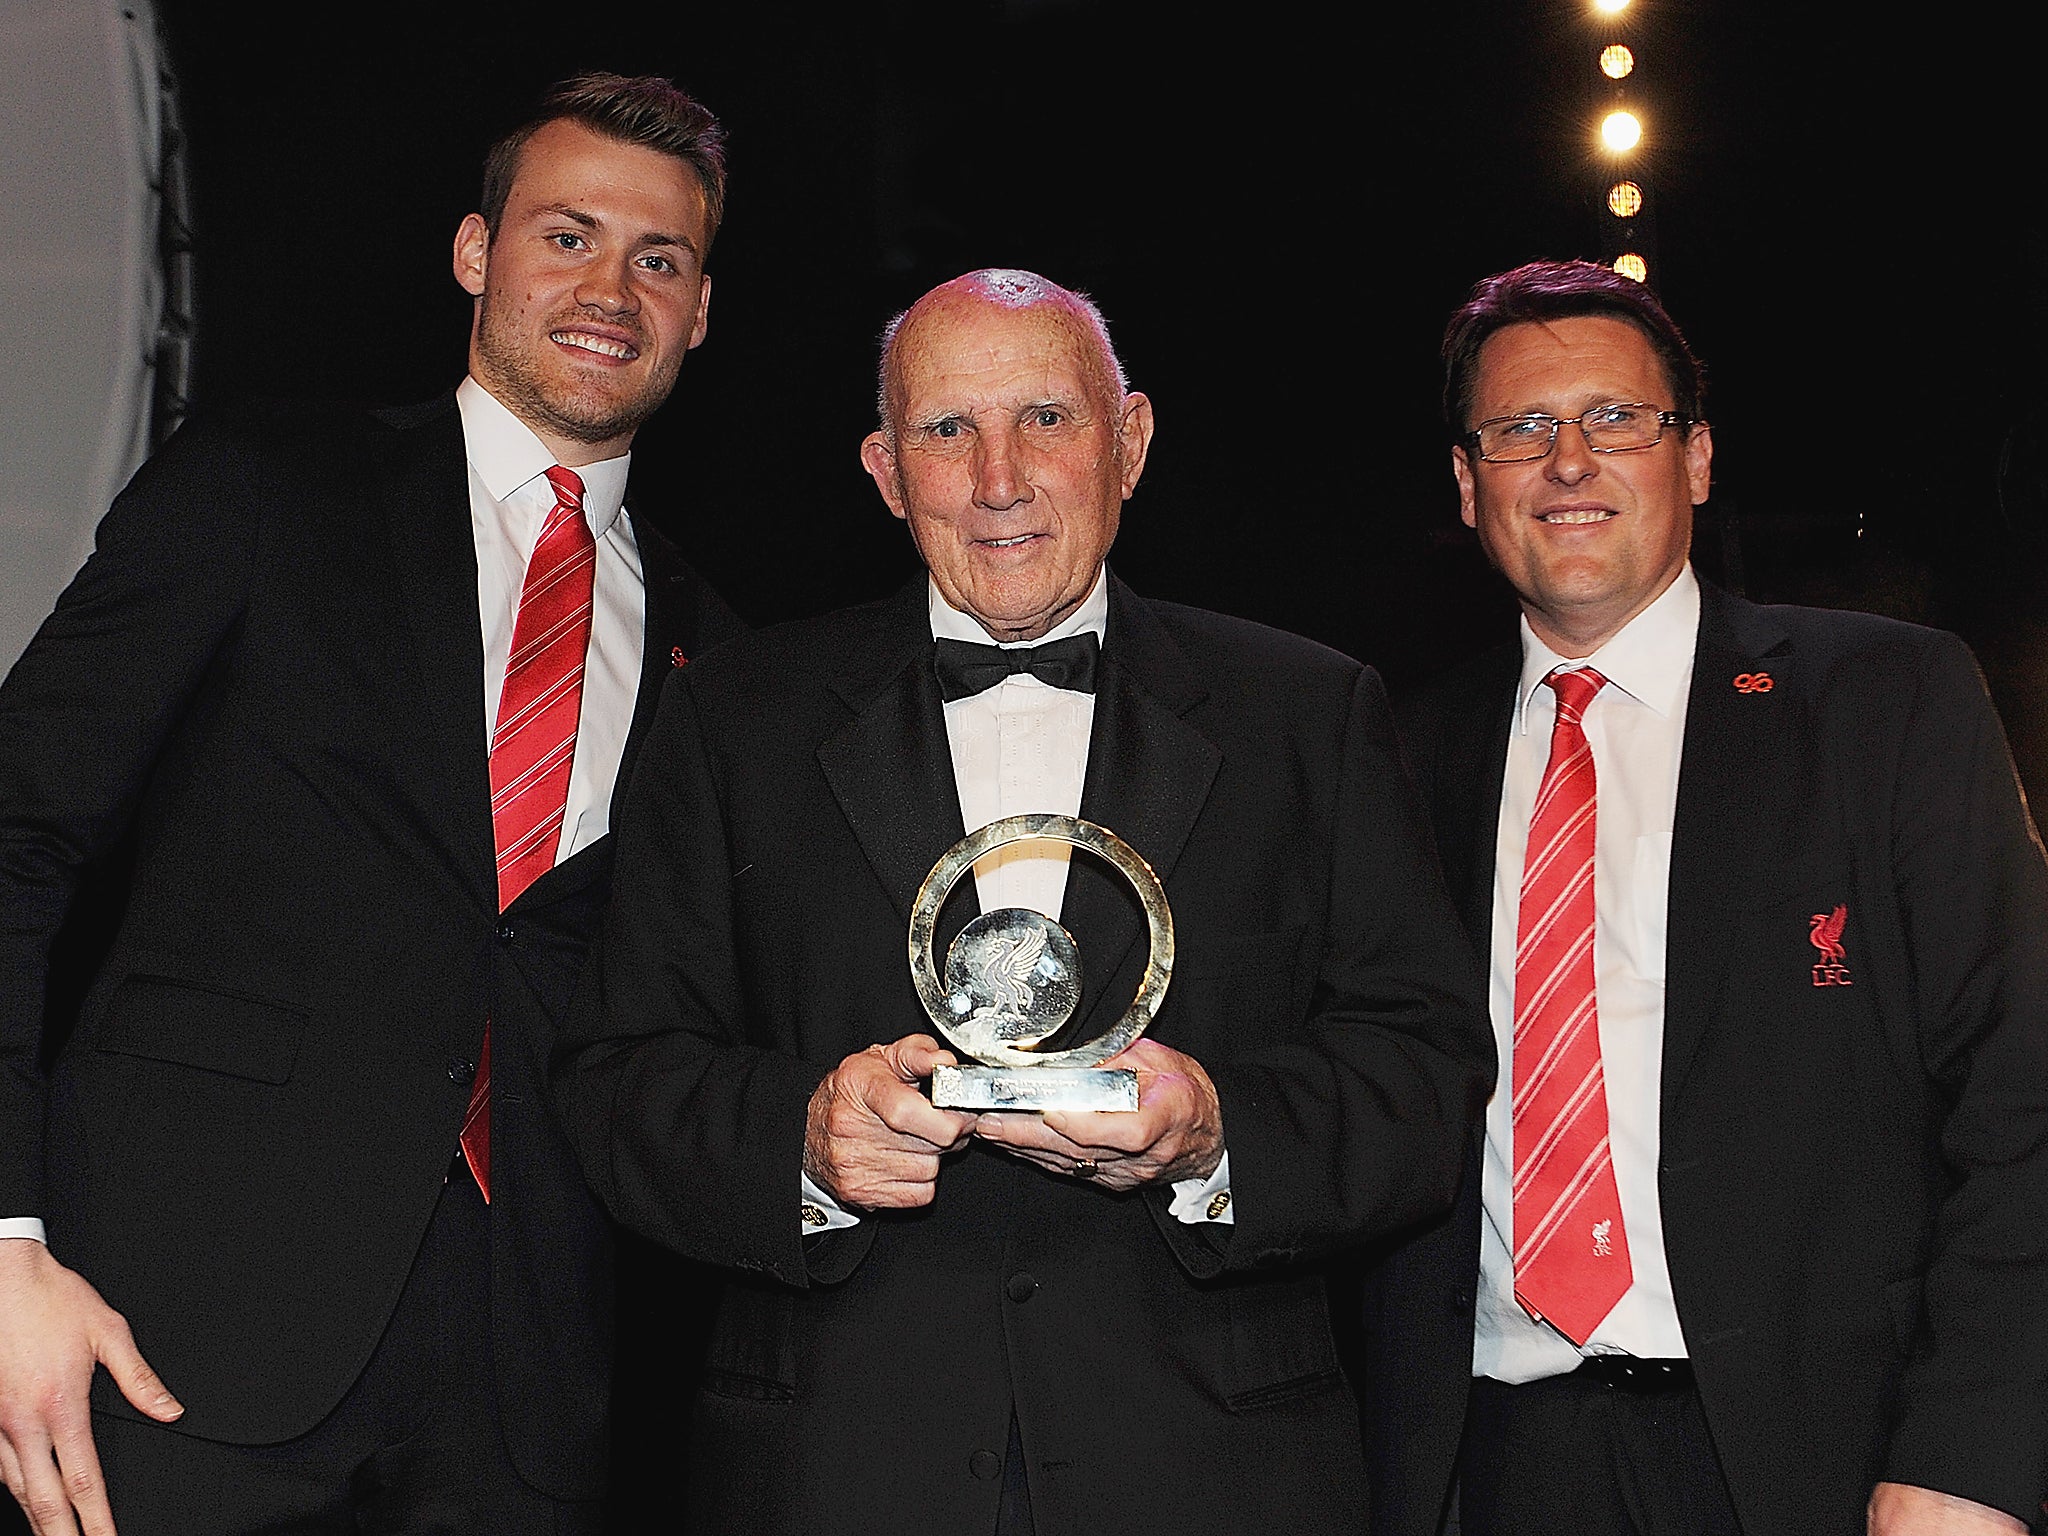 &#13;
Ronnie Moran with the Lifetime Achievement Award and Simon Mignolet and Colin Pascoe in 2014 (Getty)&#13;